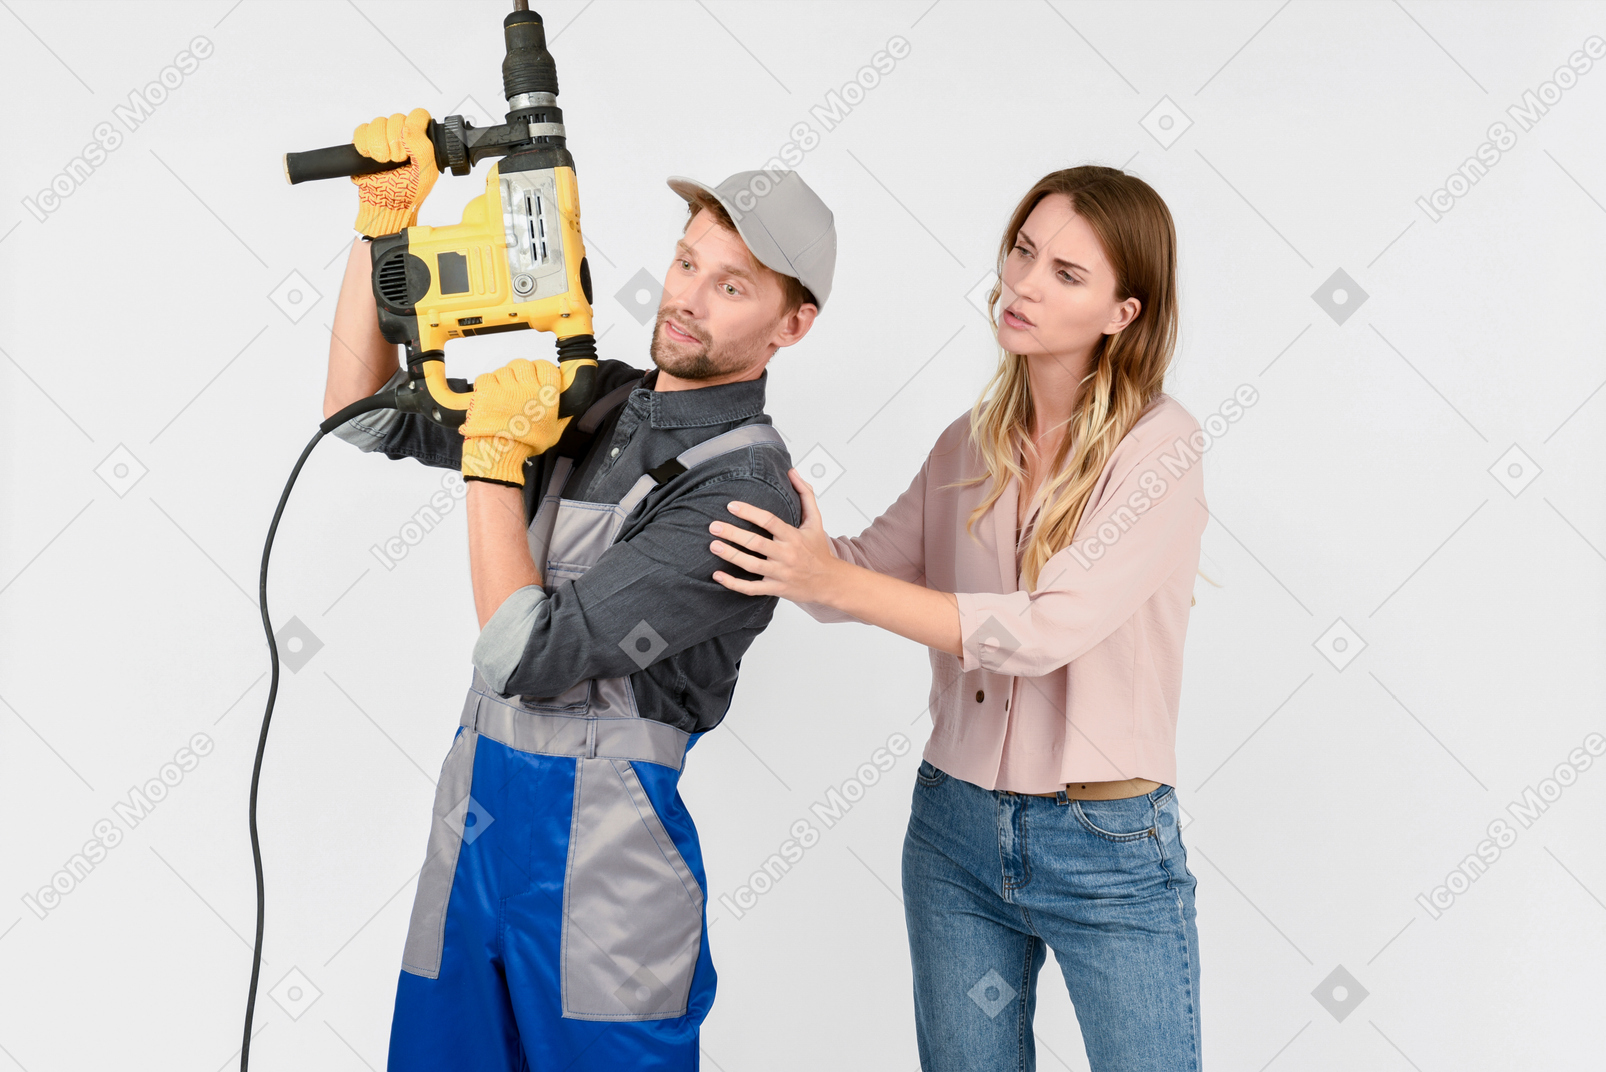 Don't worry, i'll fix all that